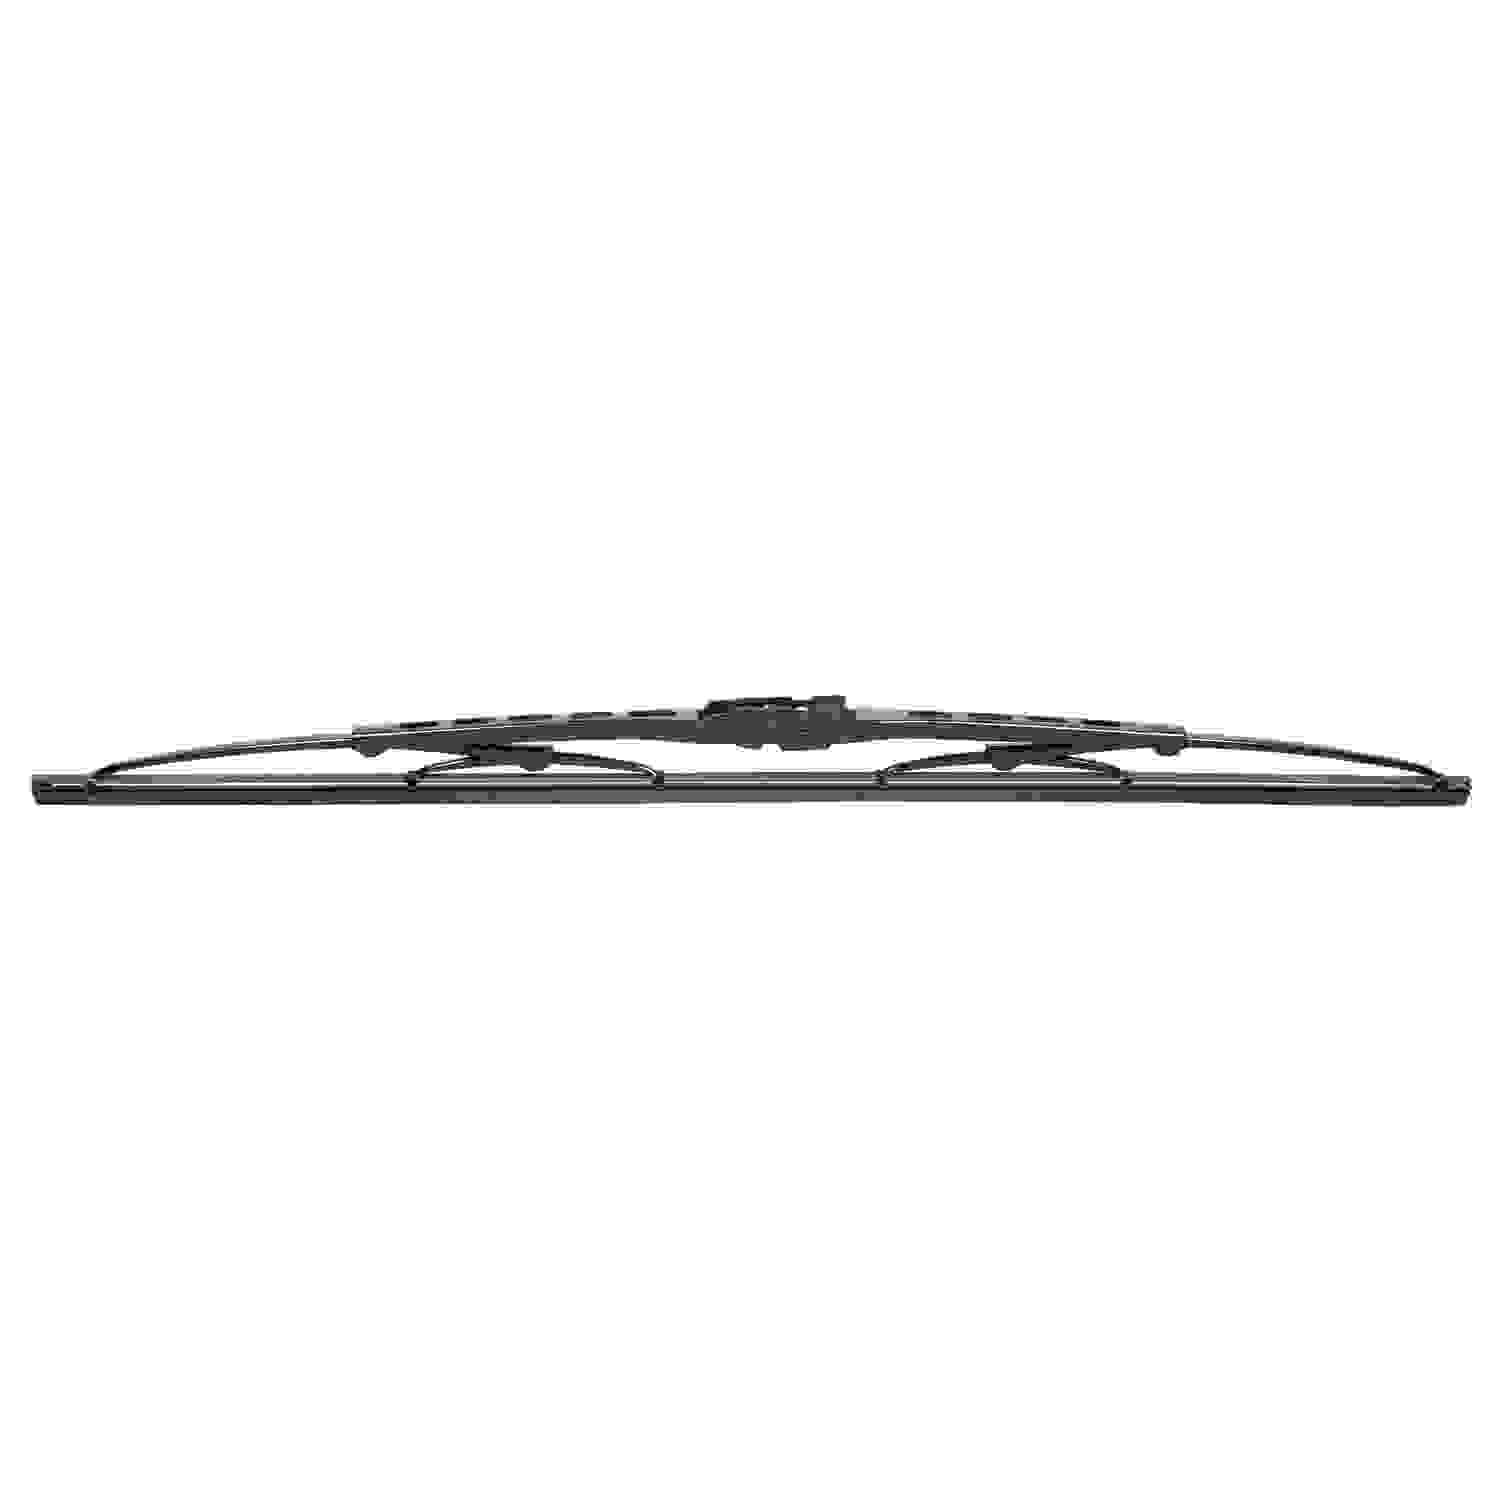 ANCO WIPER PRODUCTS - 97-Series Wiper Blade (Left) - ANC 97-18